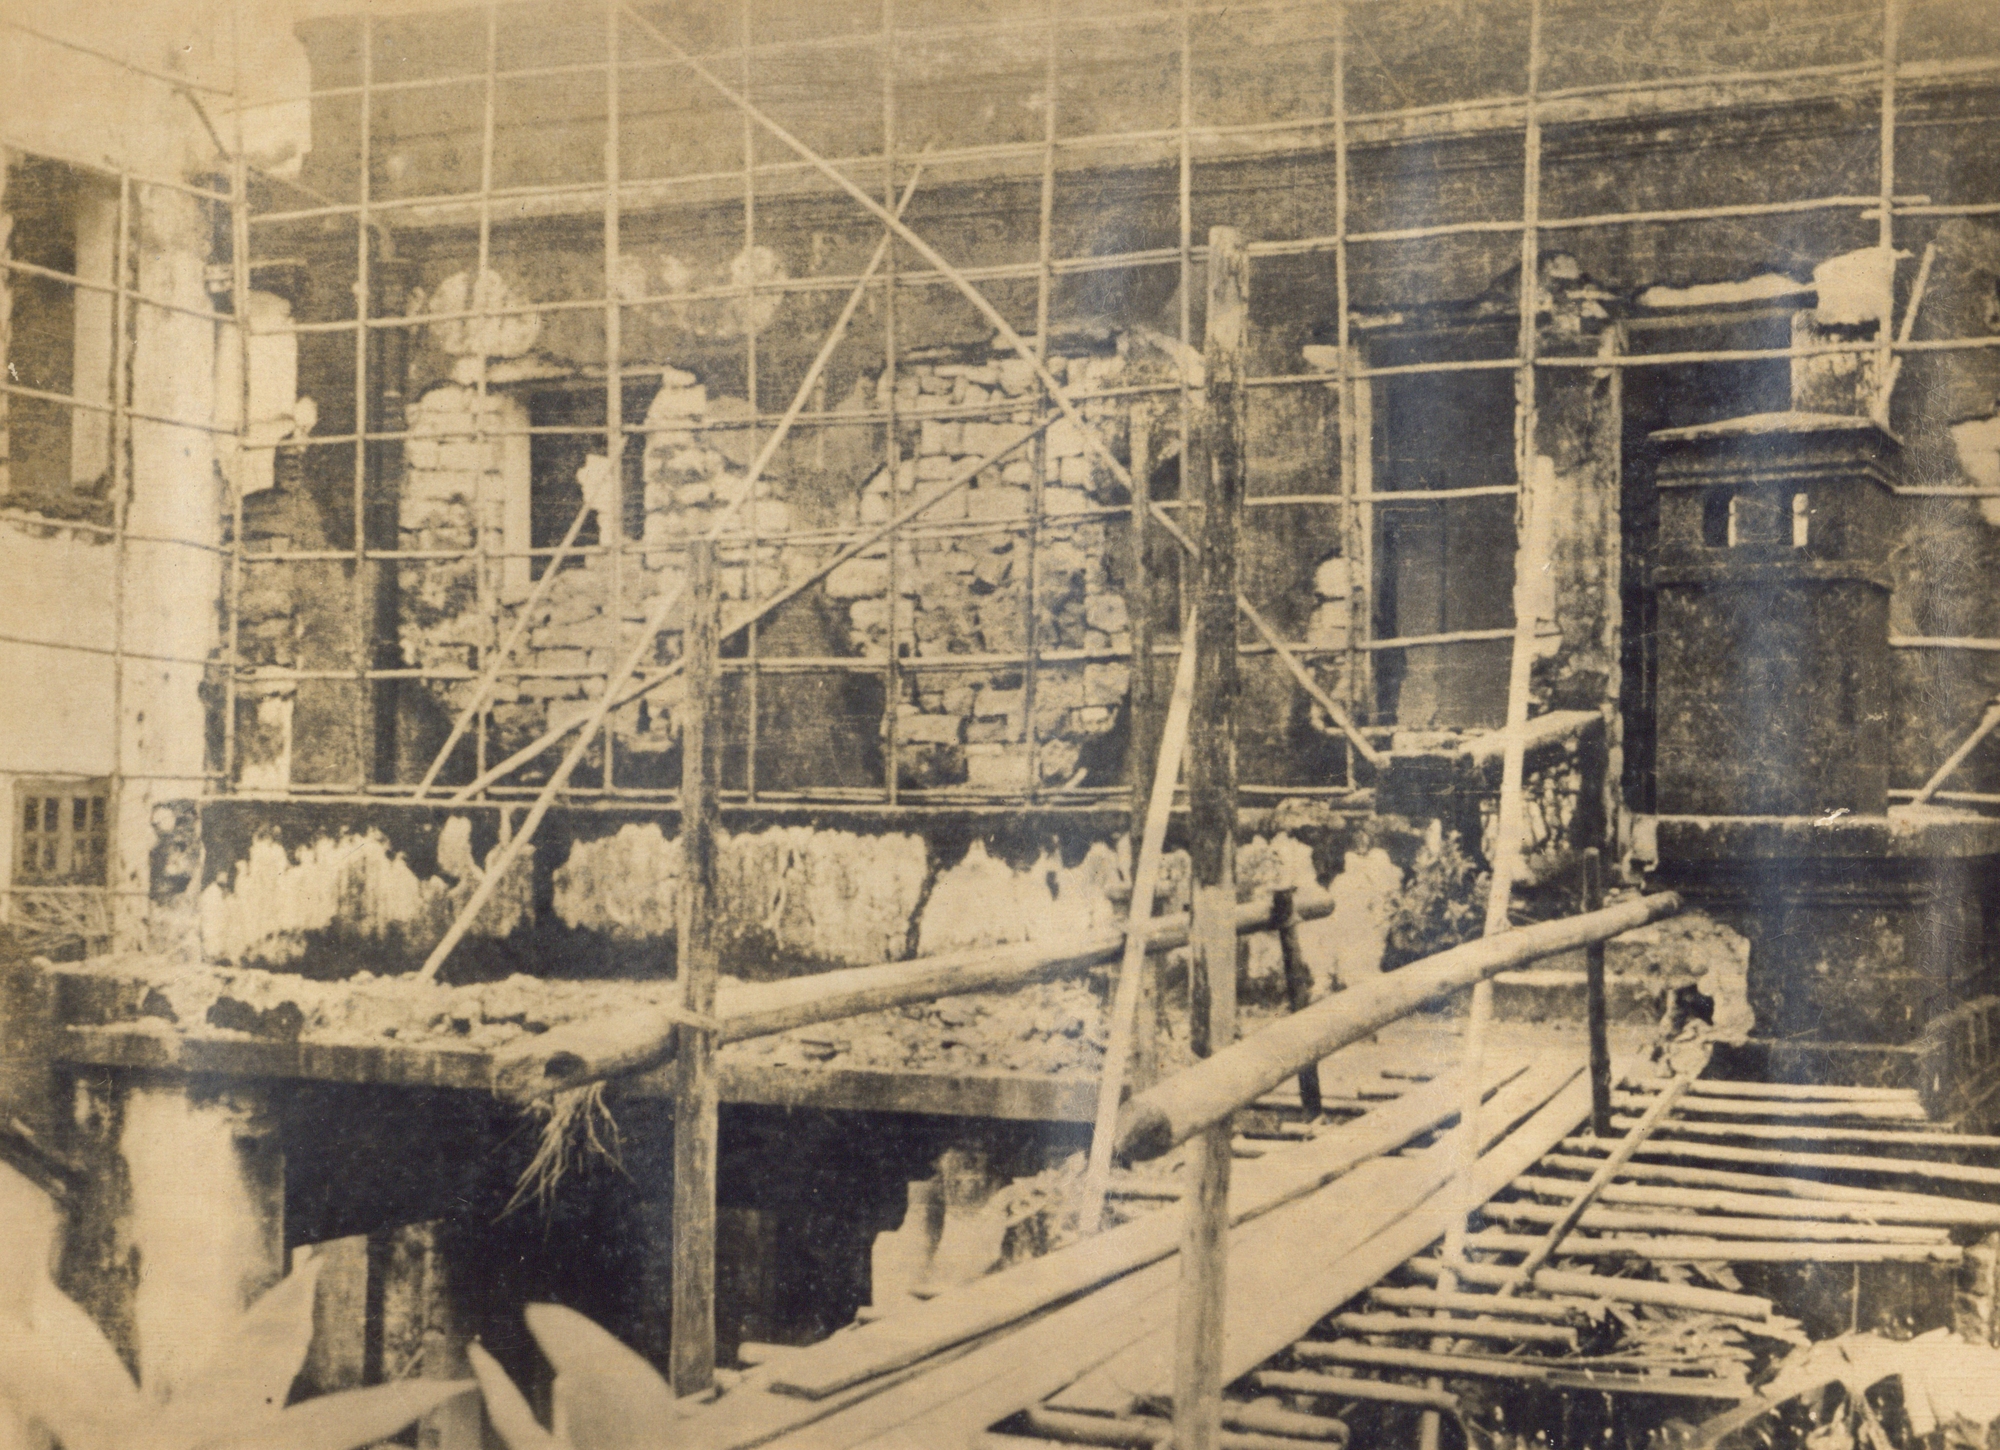 Back of the main building under repair after the War